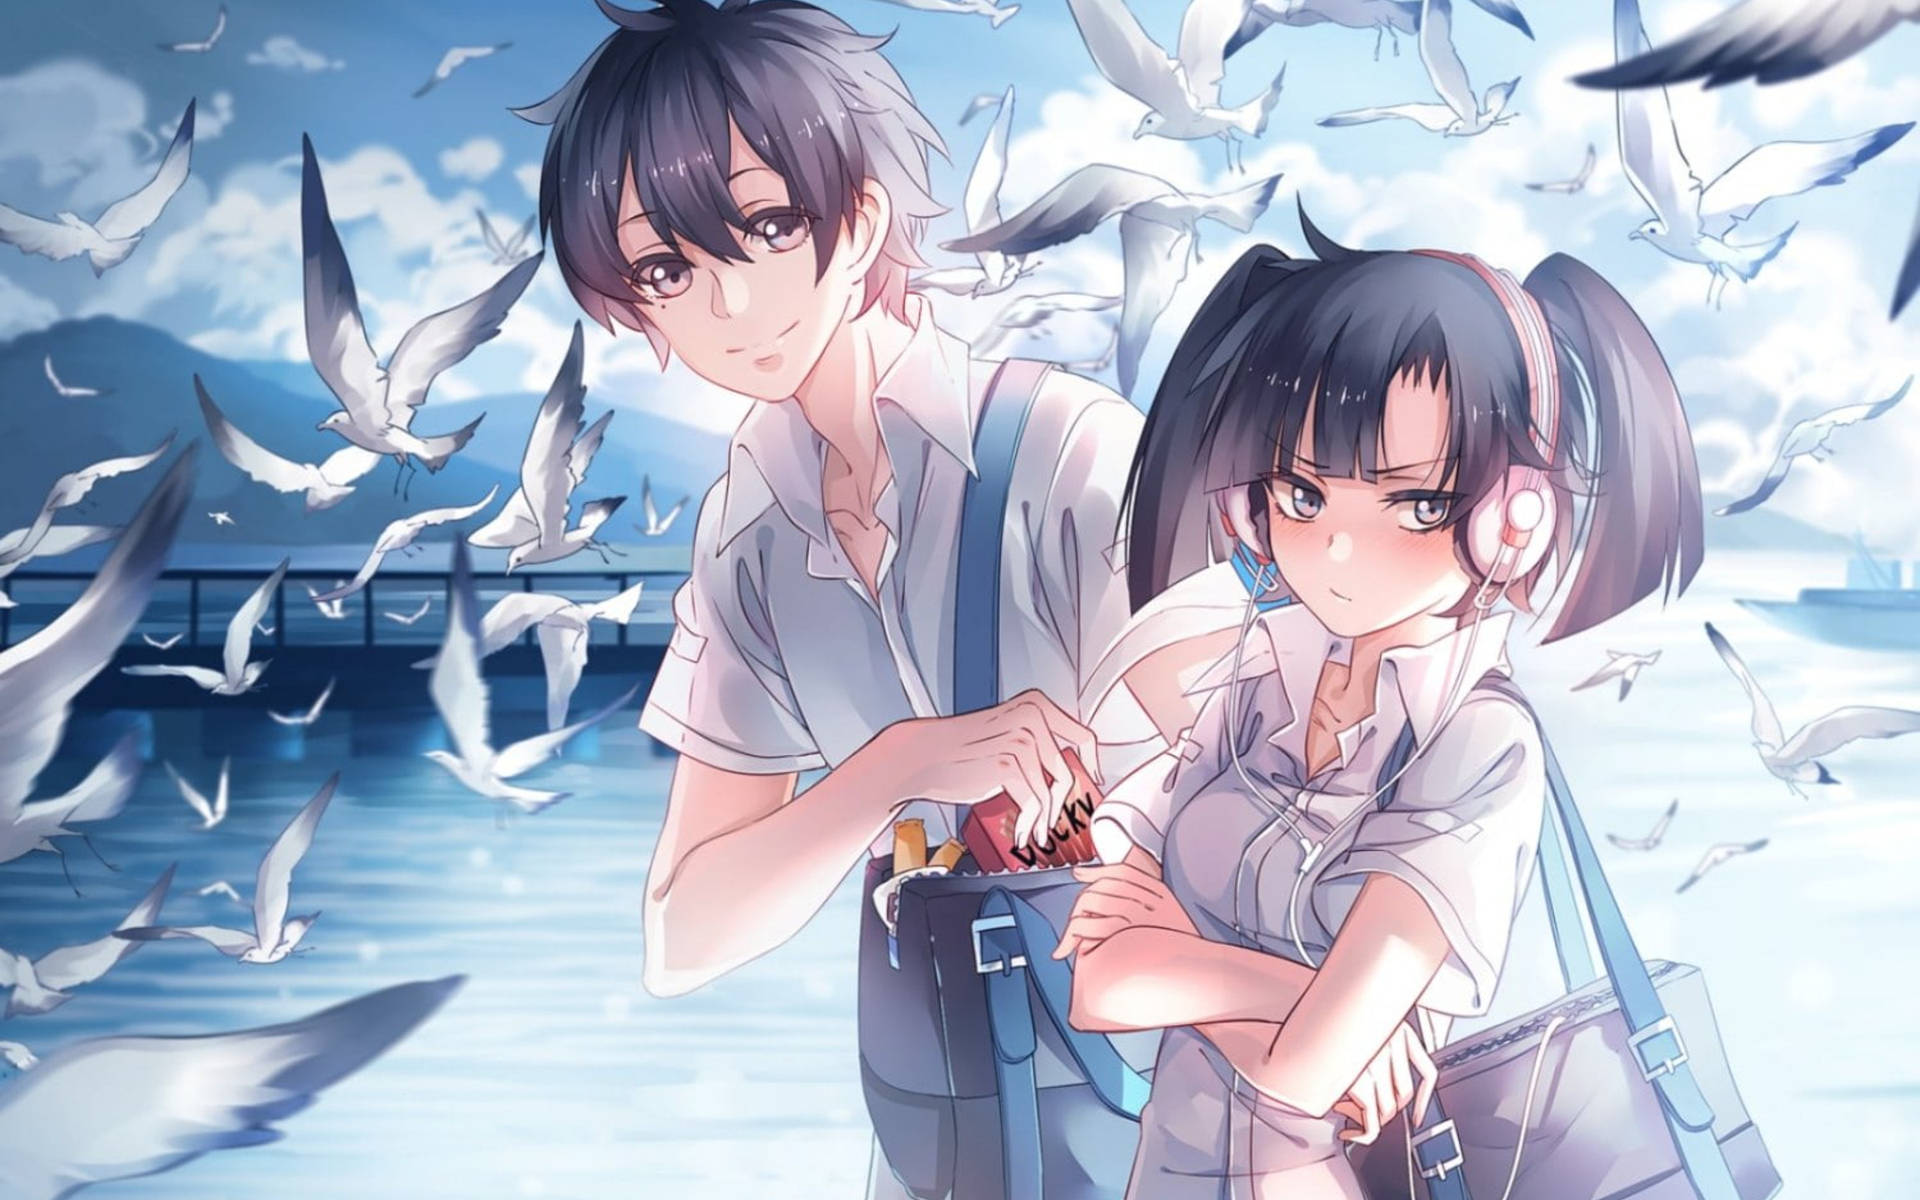 Cute Anime Couple With Birds Background